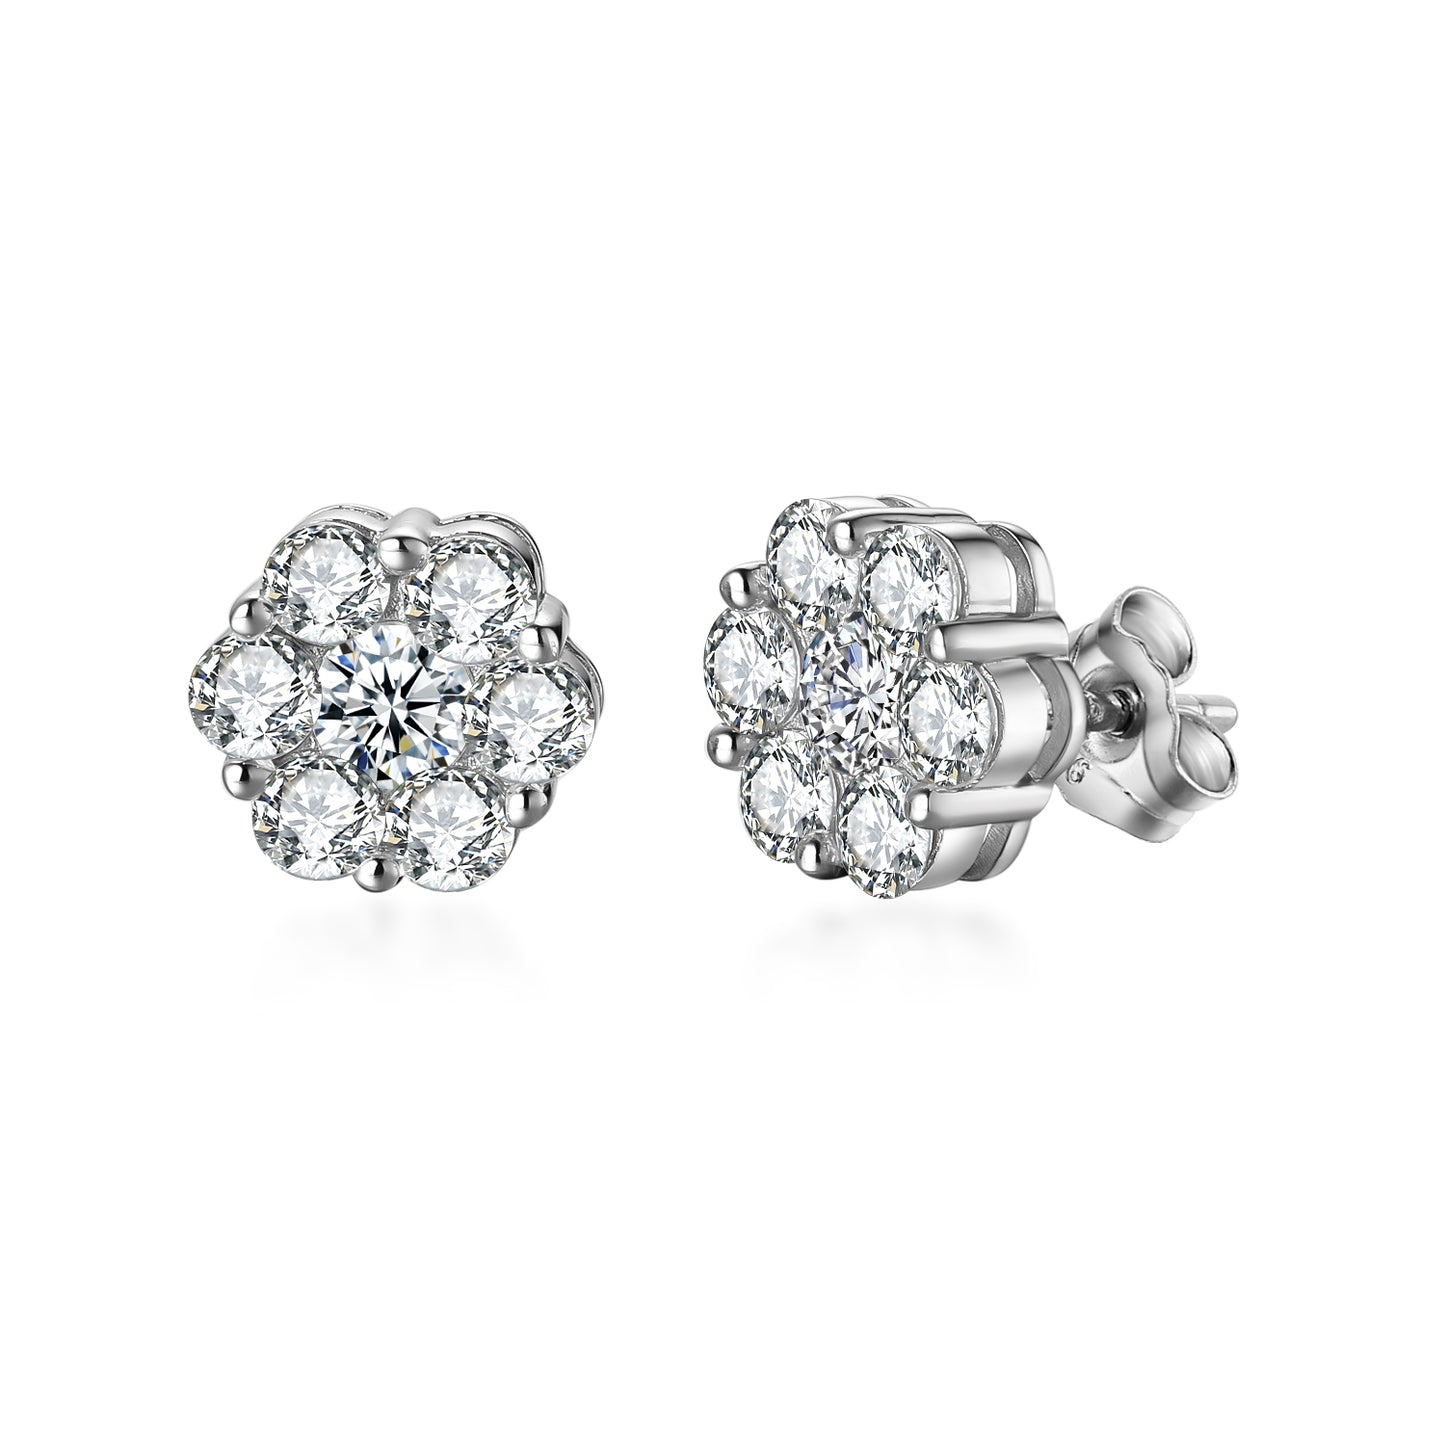 Rhodium Plated Sterling Silver 7 Stone CZ Cluster Stud Earring